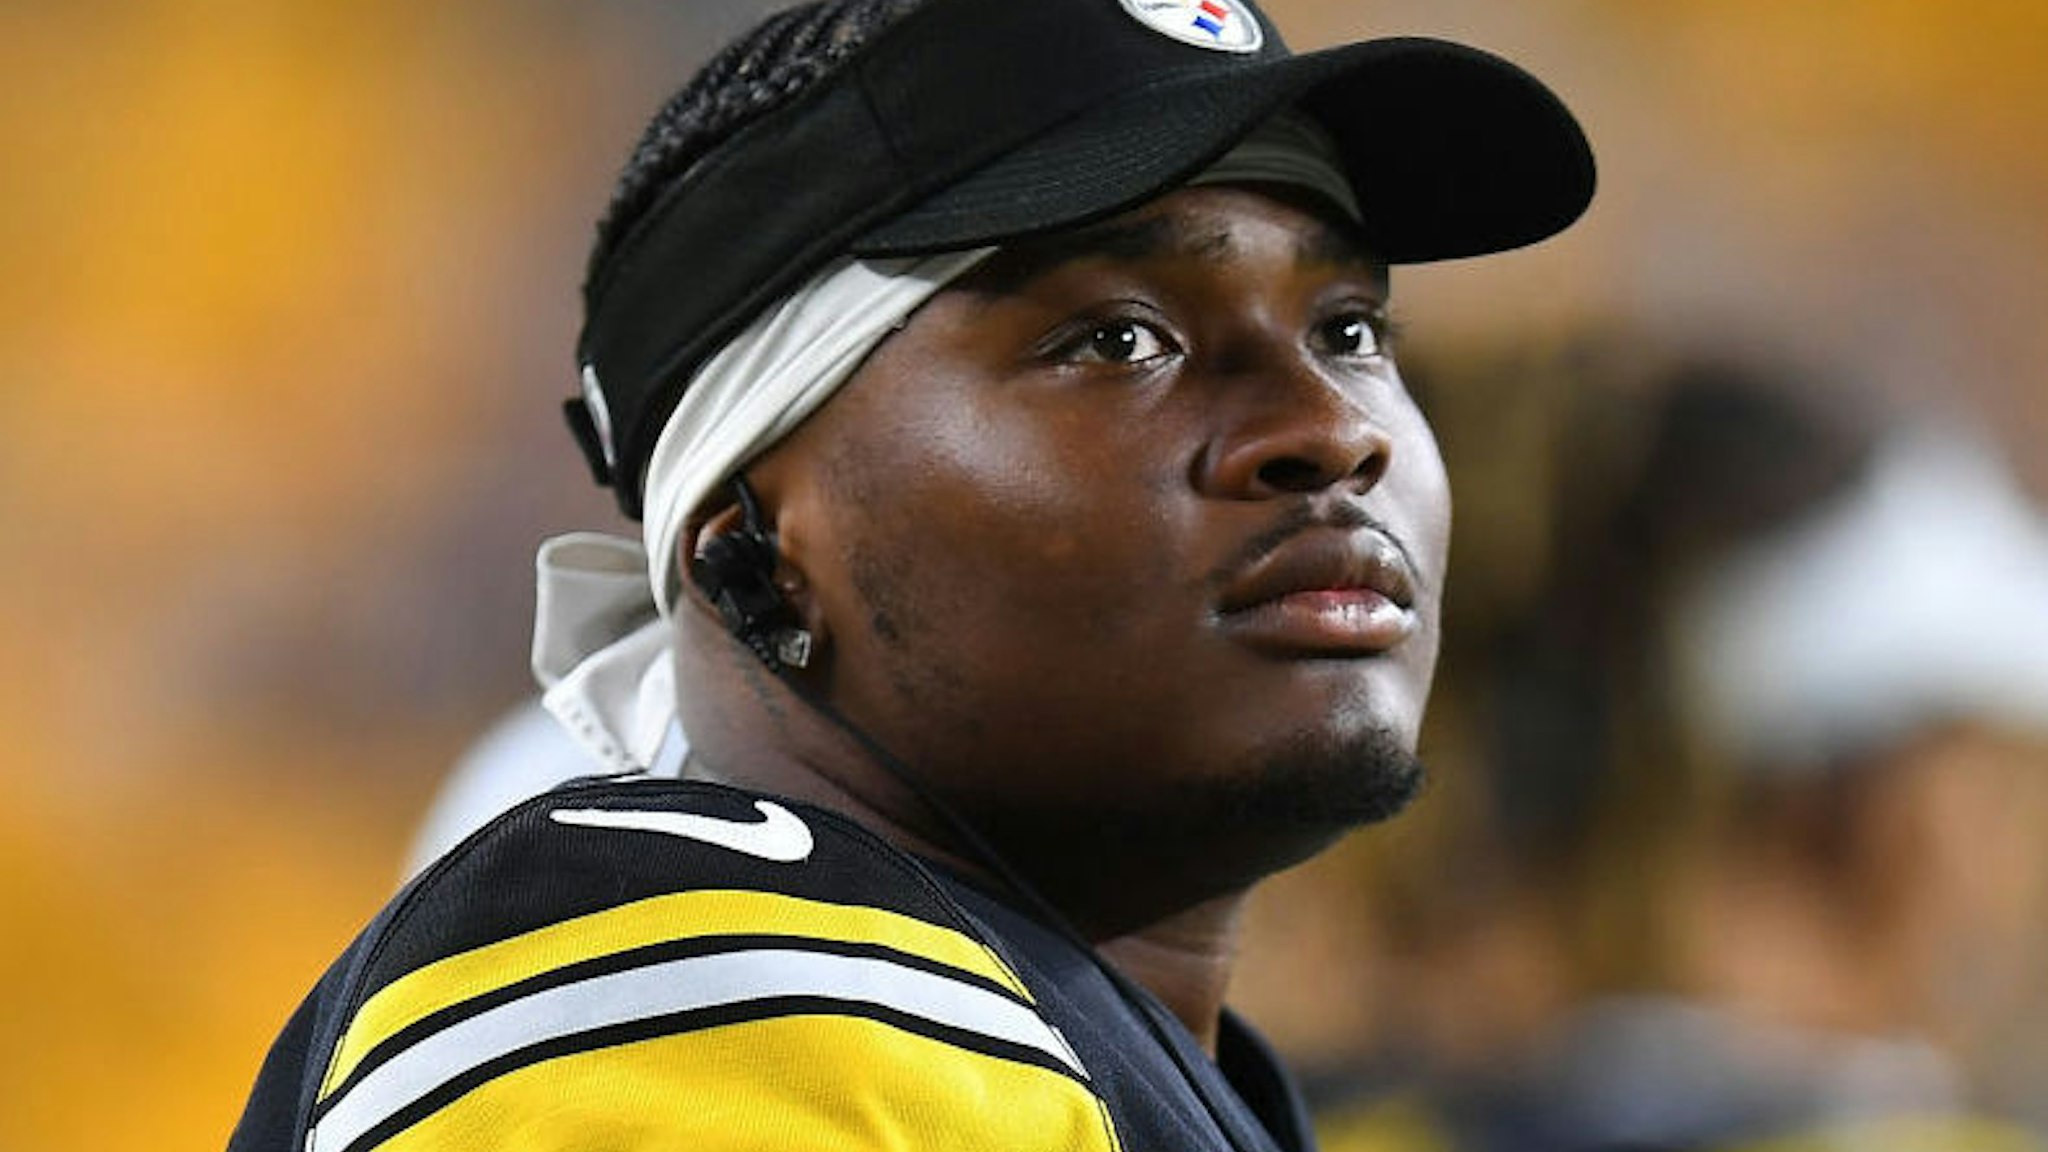 Dwayne Haskins #3 of the Pittsburgh Steelers looks on during the game against the Detroit Lions at Heinz Field on August 21, 2021 in Pittsburgh, Pennsylvania.